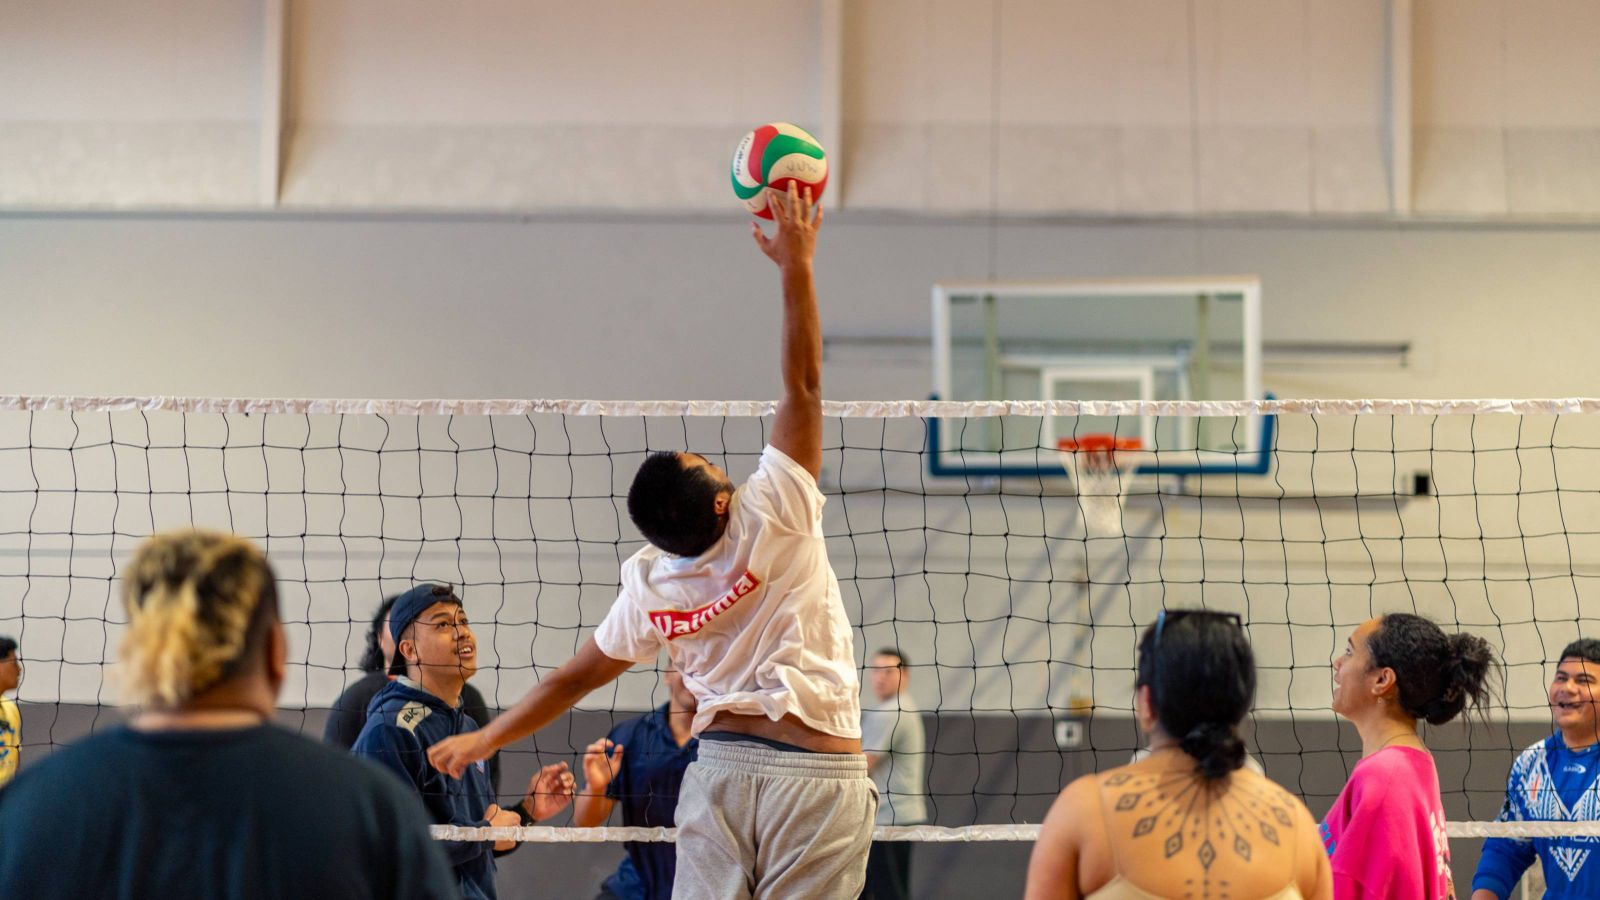 A volleyball player rises high for a spike